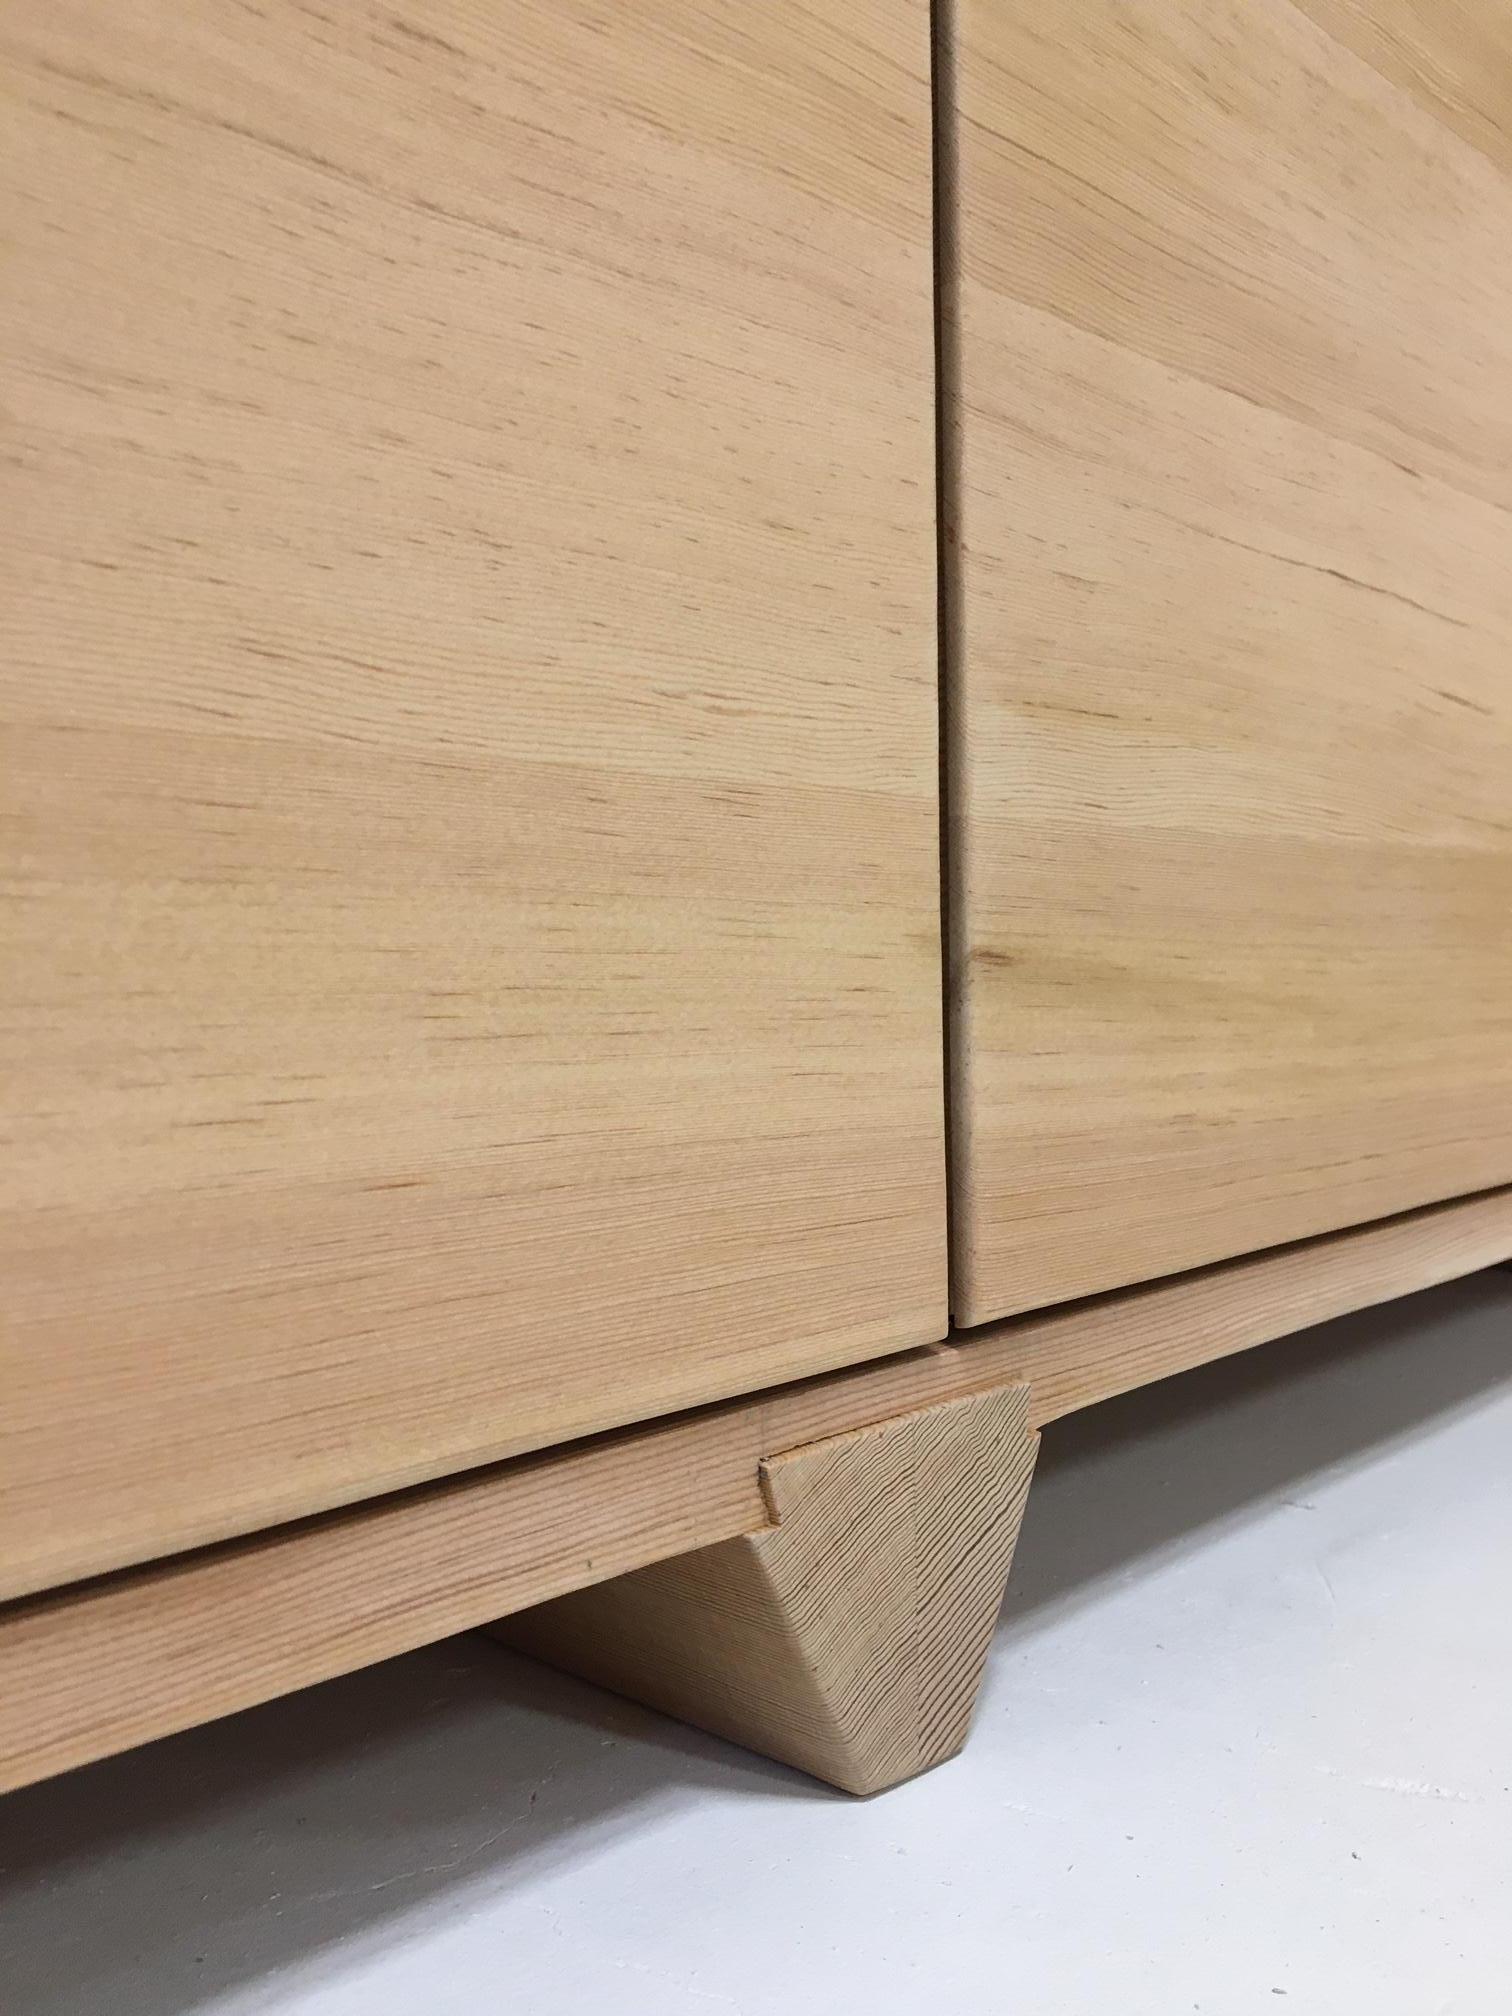 Master craftsmanship, timeless design. Made from solid wood vertical grain douglas fir, this elegant credenza will bring warmth and serenity to the space it lives in. Soft close doors and drawers add to the quiet calm of the piece. The oversized box